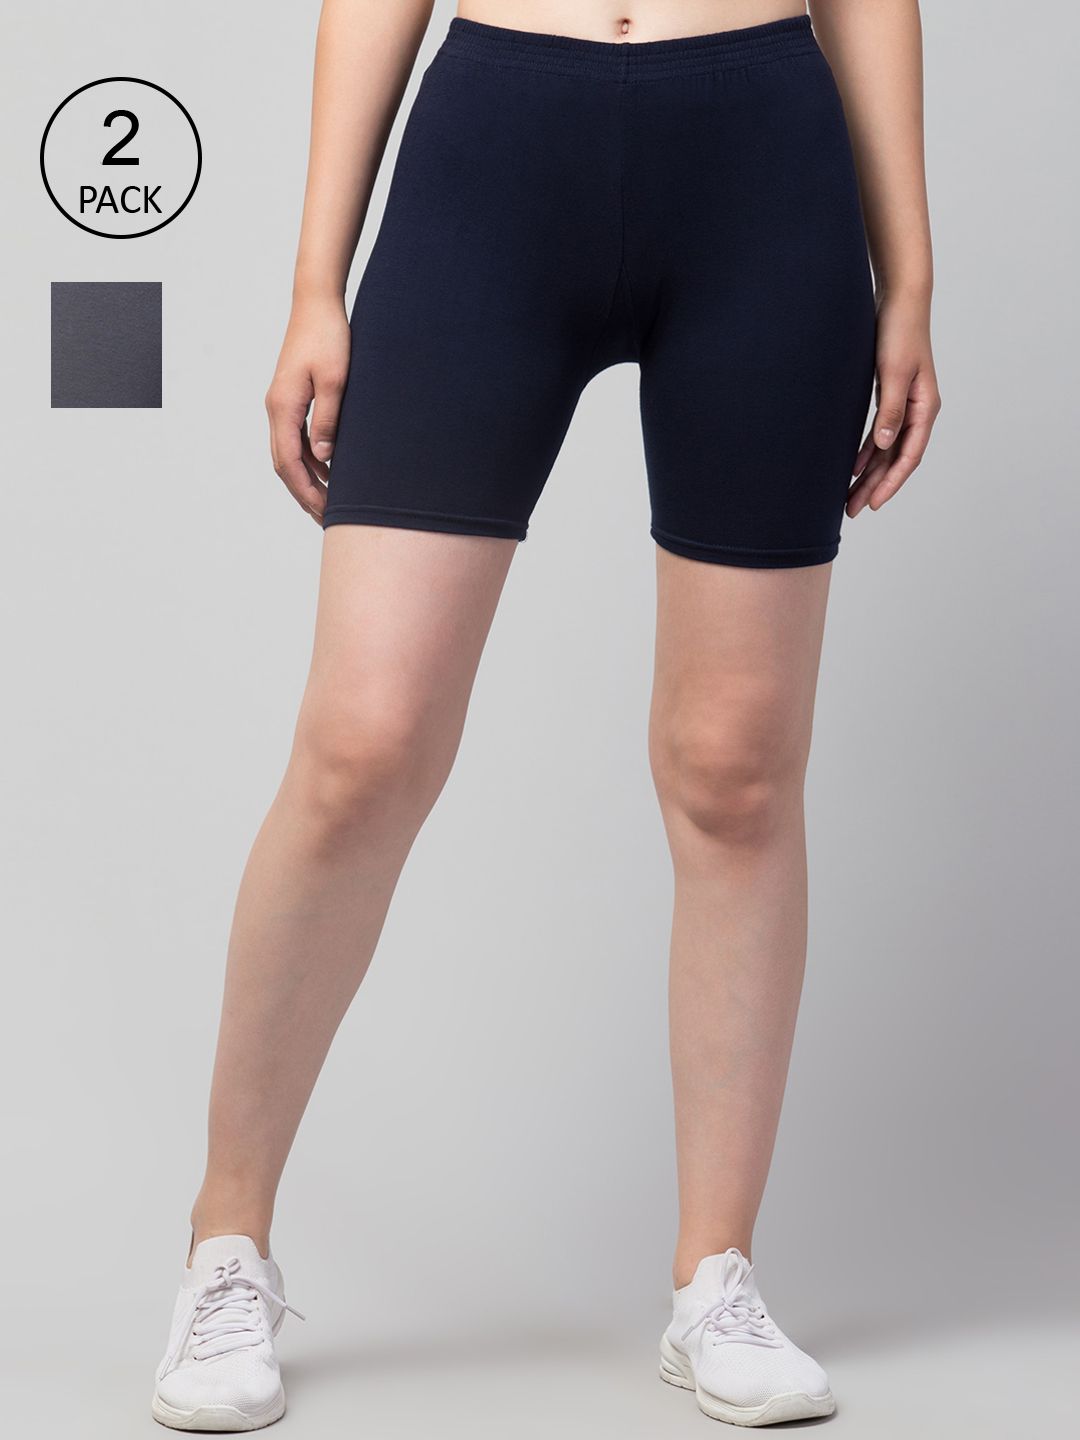 Apraa & Parma Women Navy Blue and Grey Pack of 2 Slim Fit Cycling Sports Shorts Price in India